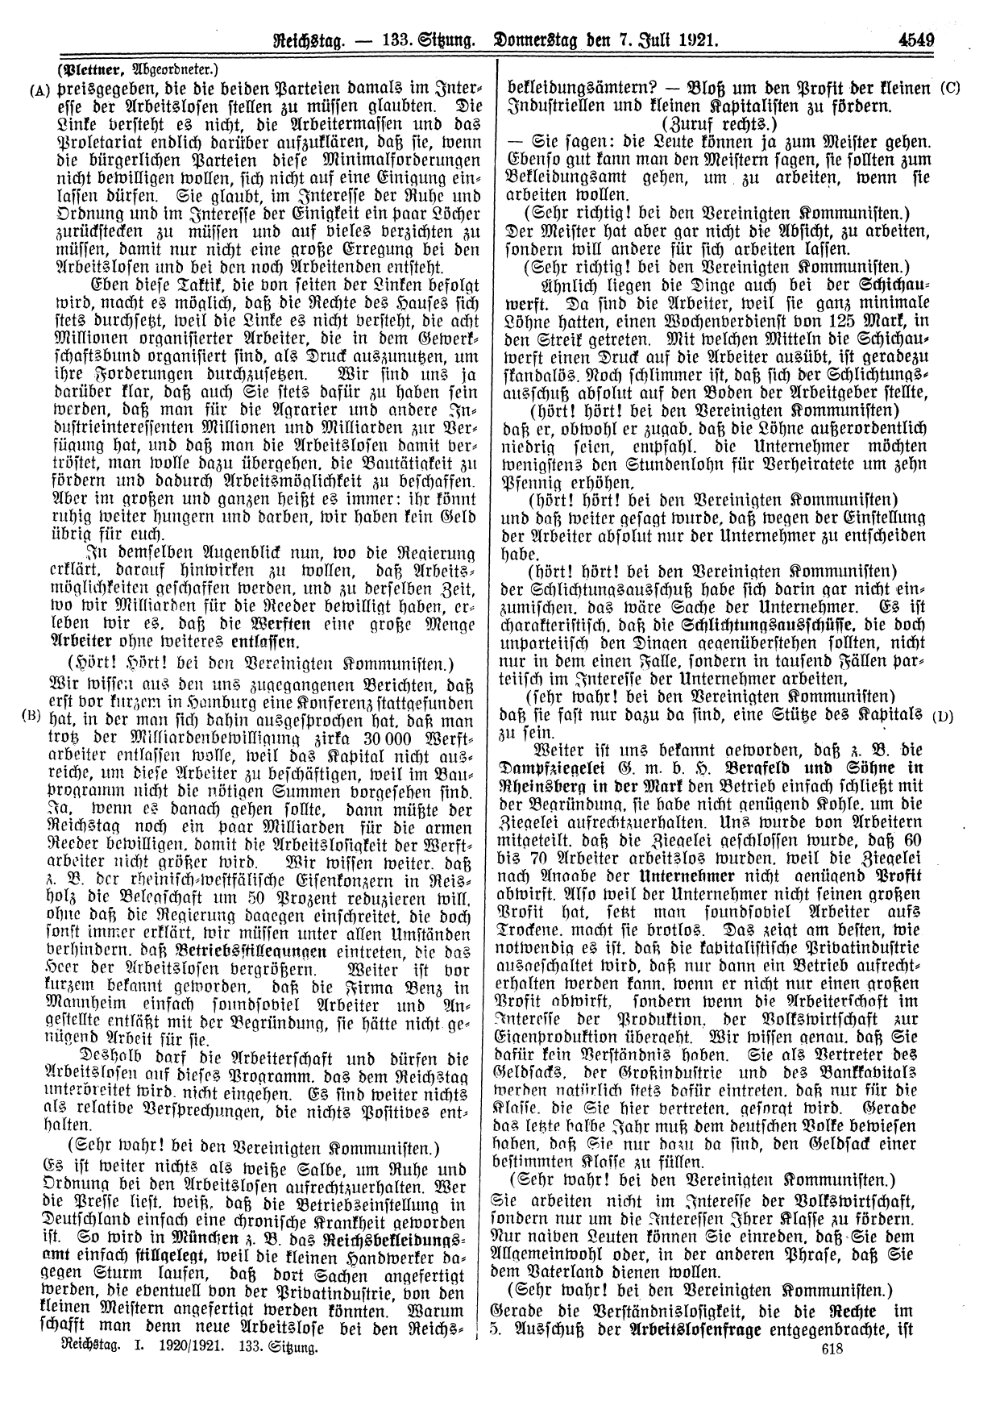 Scan of page 4549